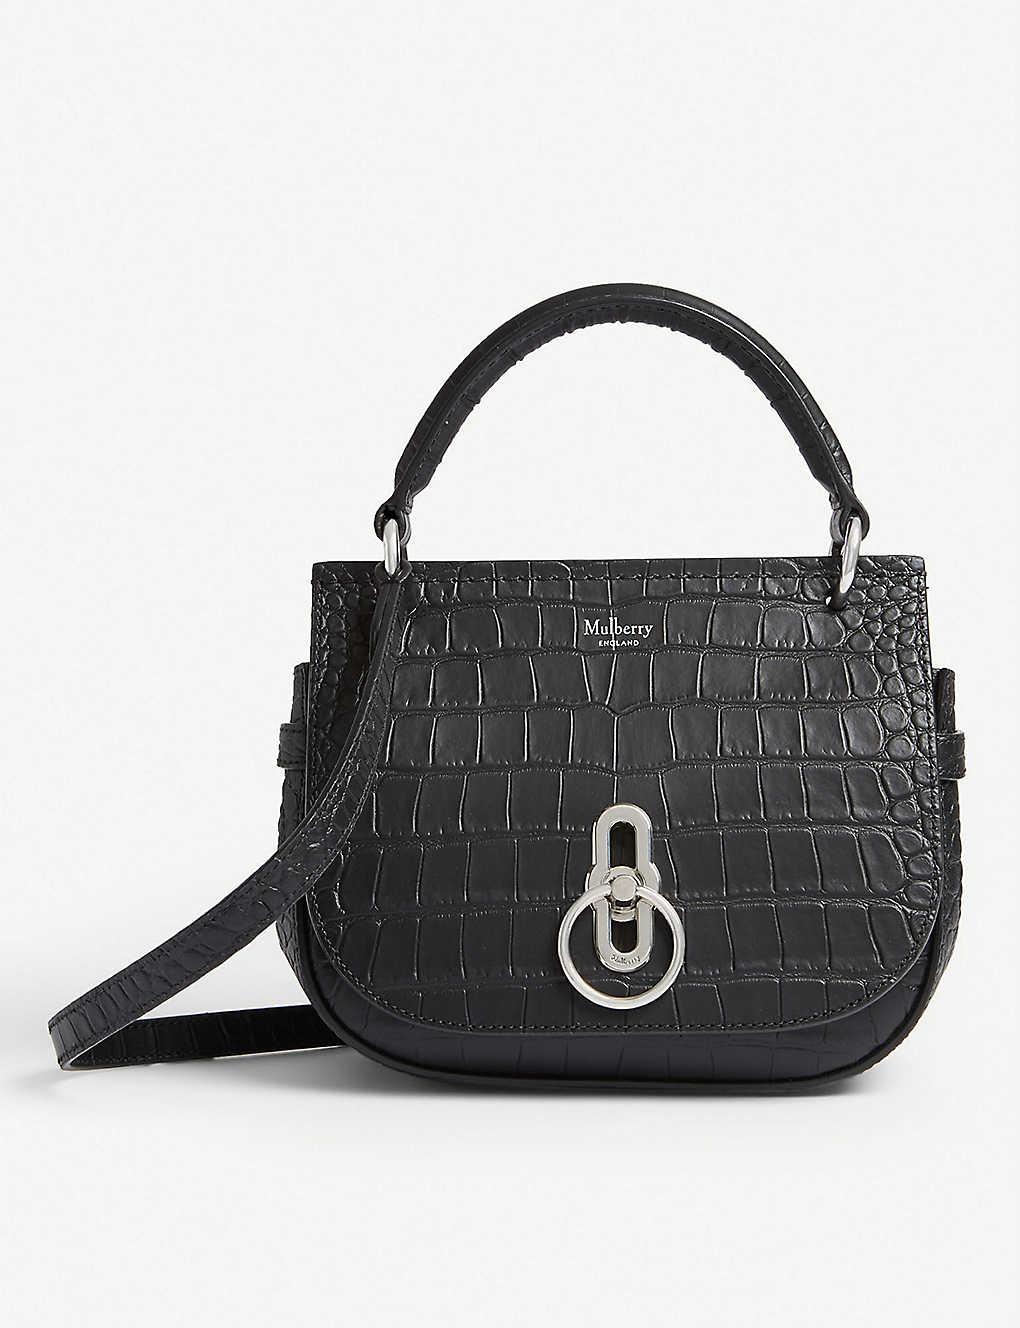 Mulberry Amberley Small Croc-embossed Leather Satchel in Black | Lyst